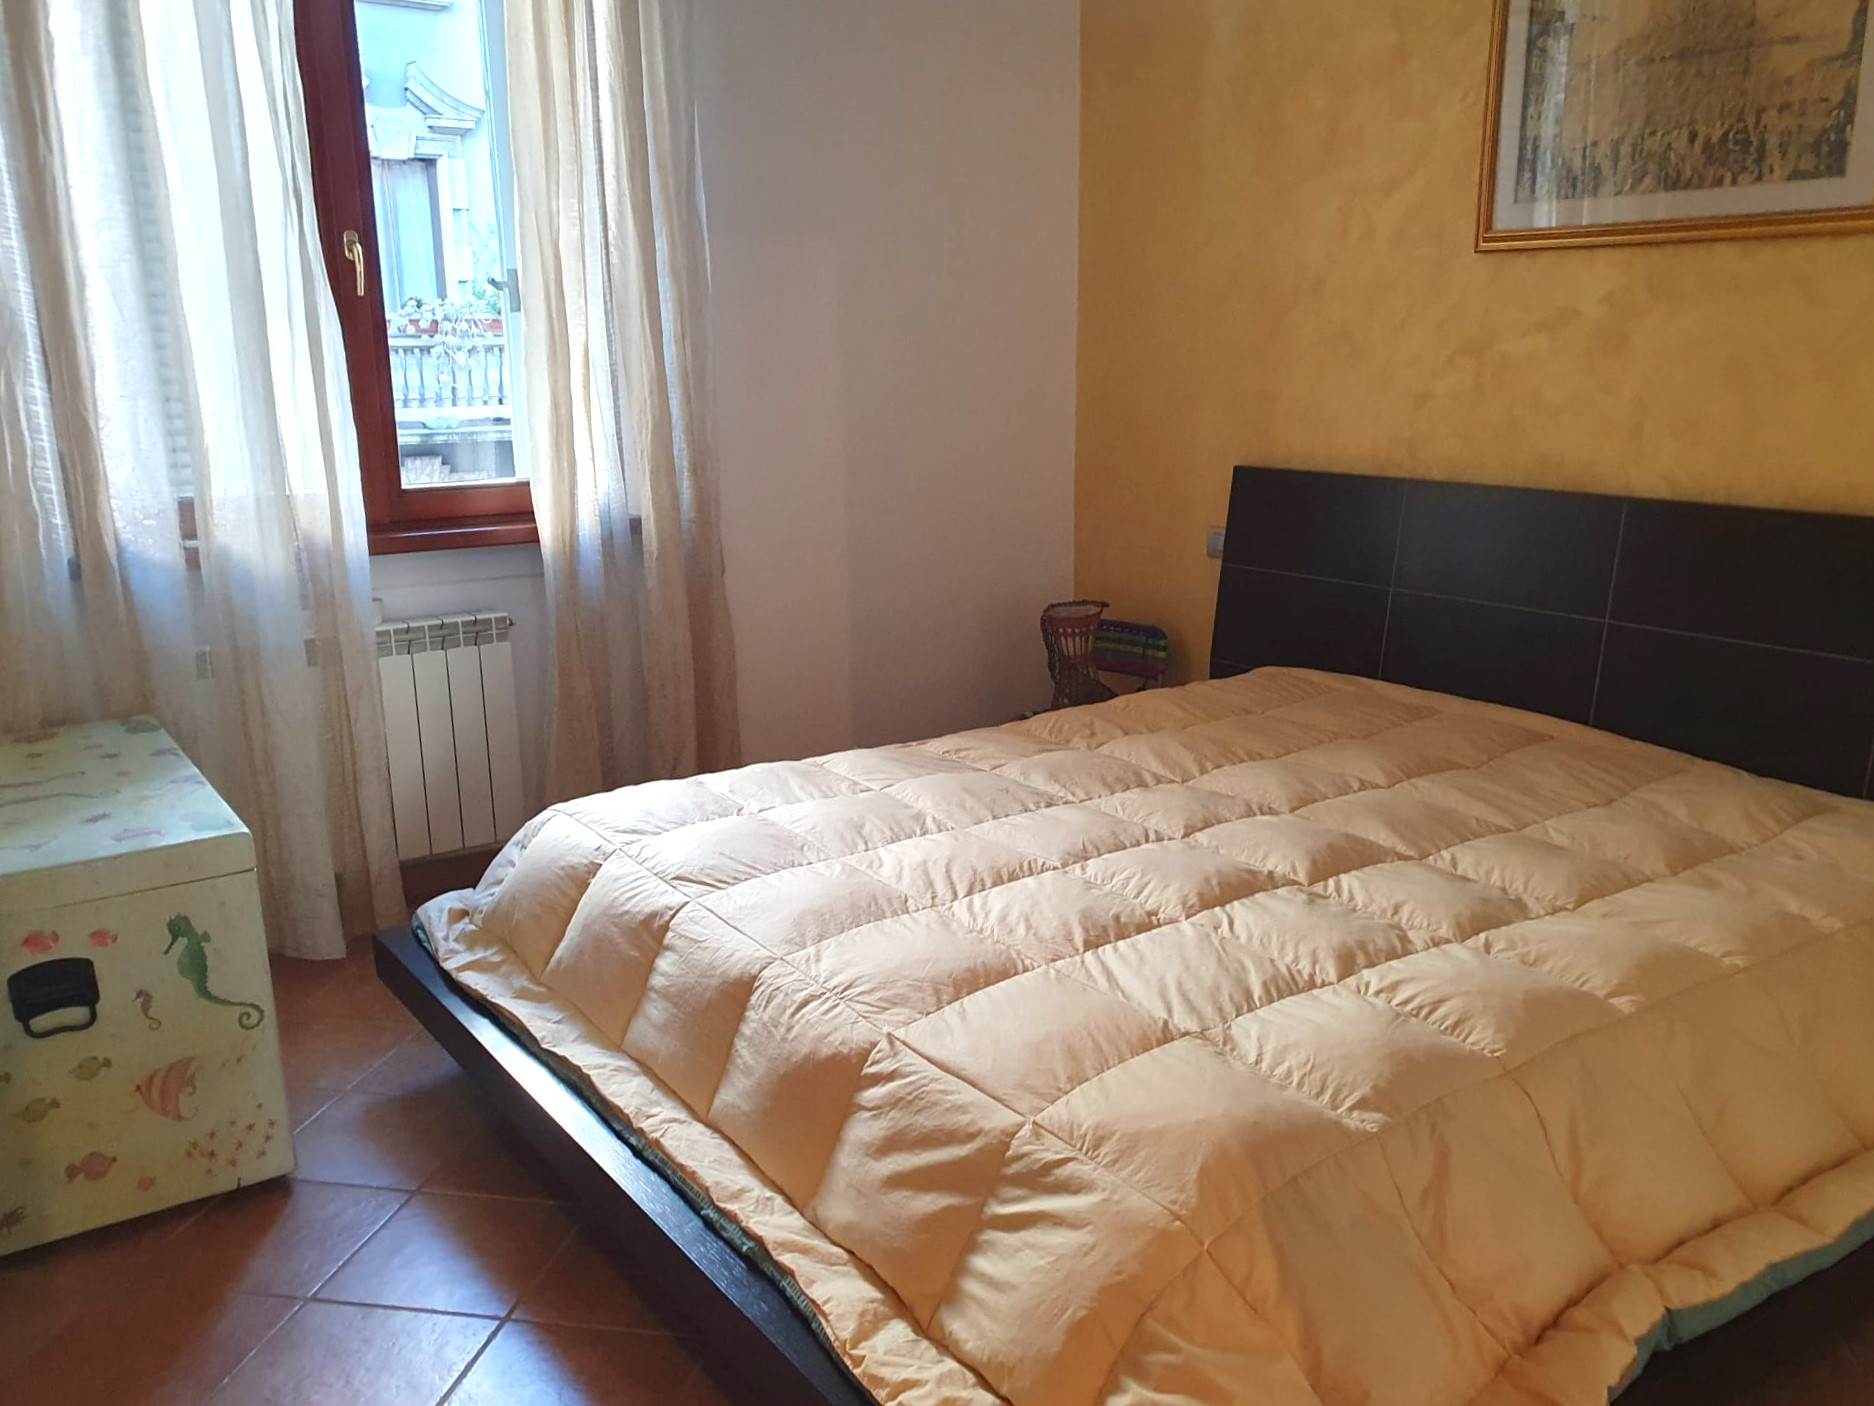 SESTO SAN GIOVANNI, Room/Bedroom for rent of 14 Sq. mt., Excellent Condition, Heating Individual heating system, Energetic class: G, Epi: 175 kwh/m2 